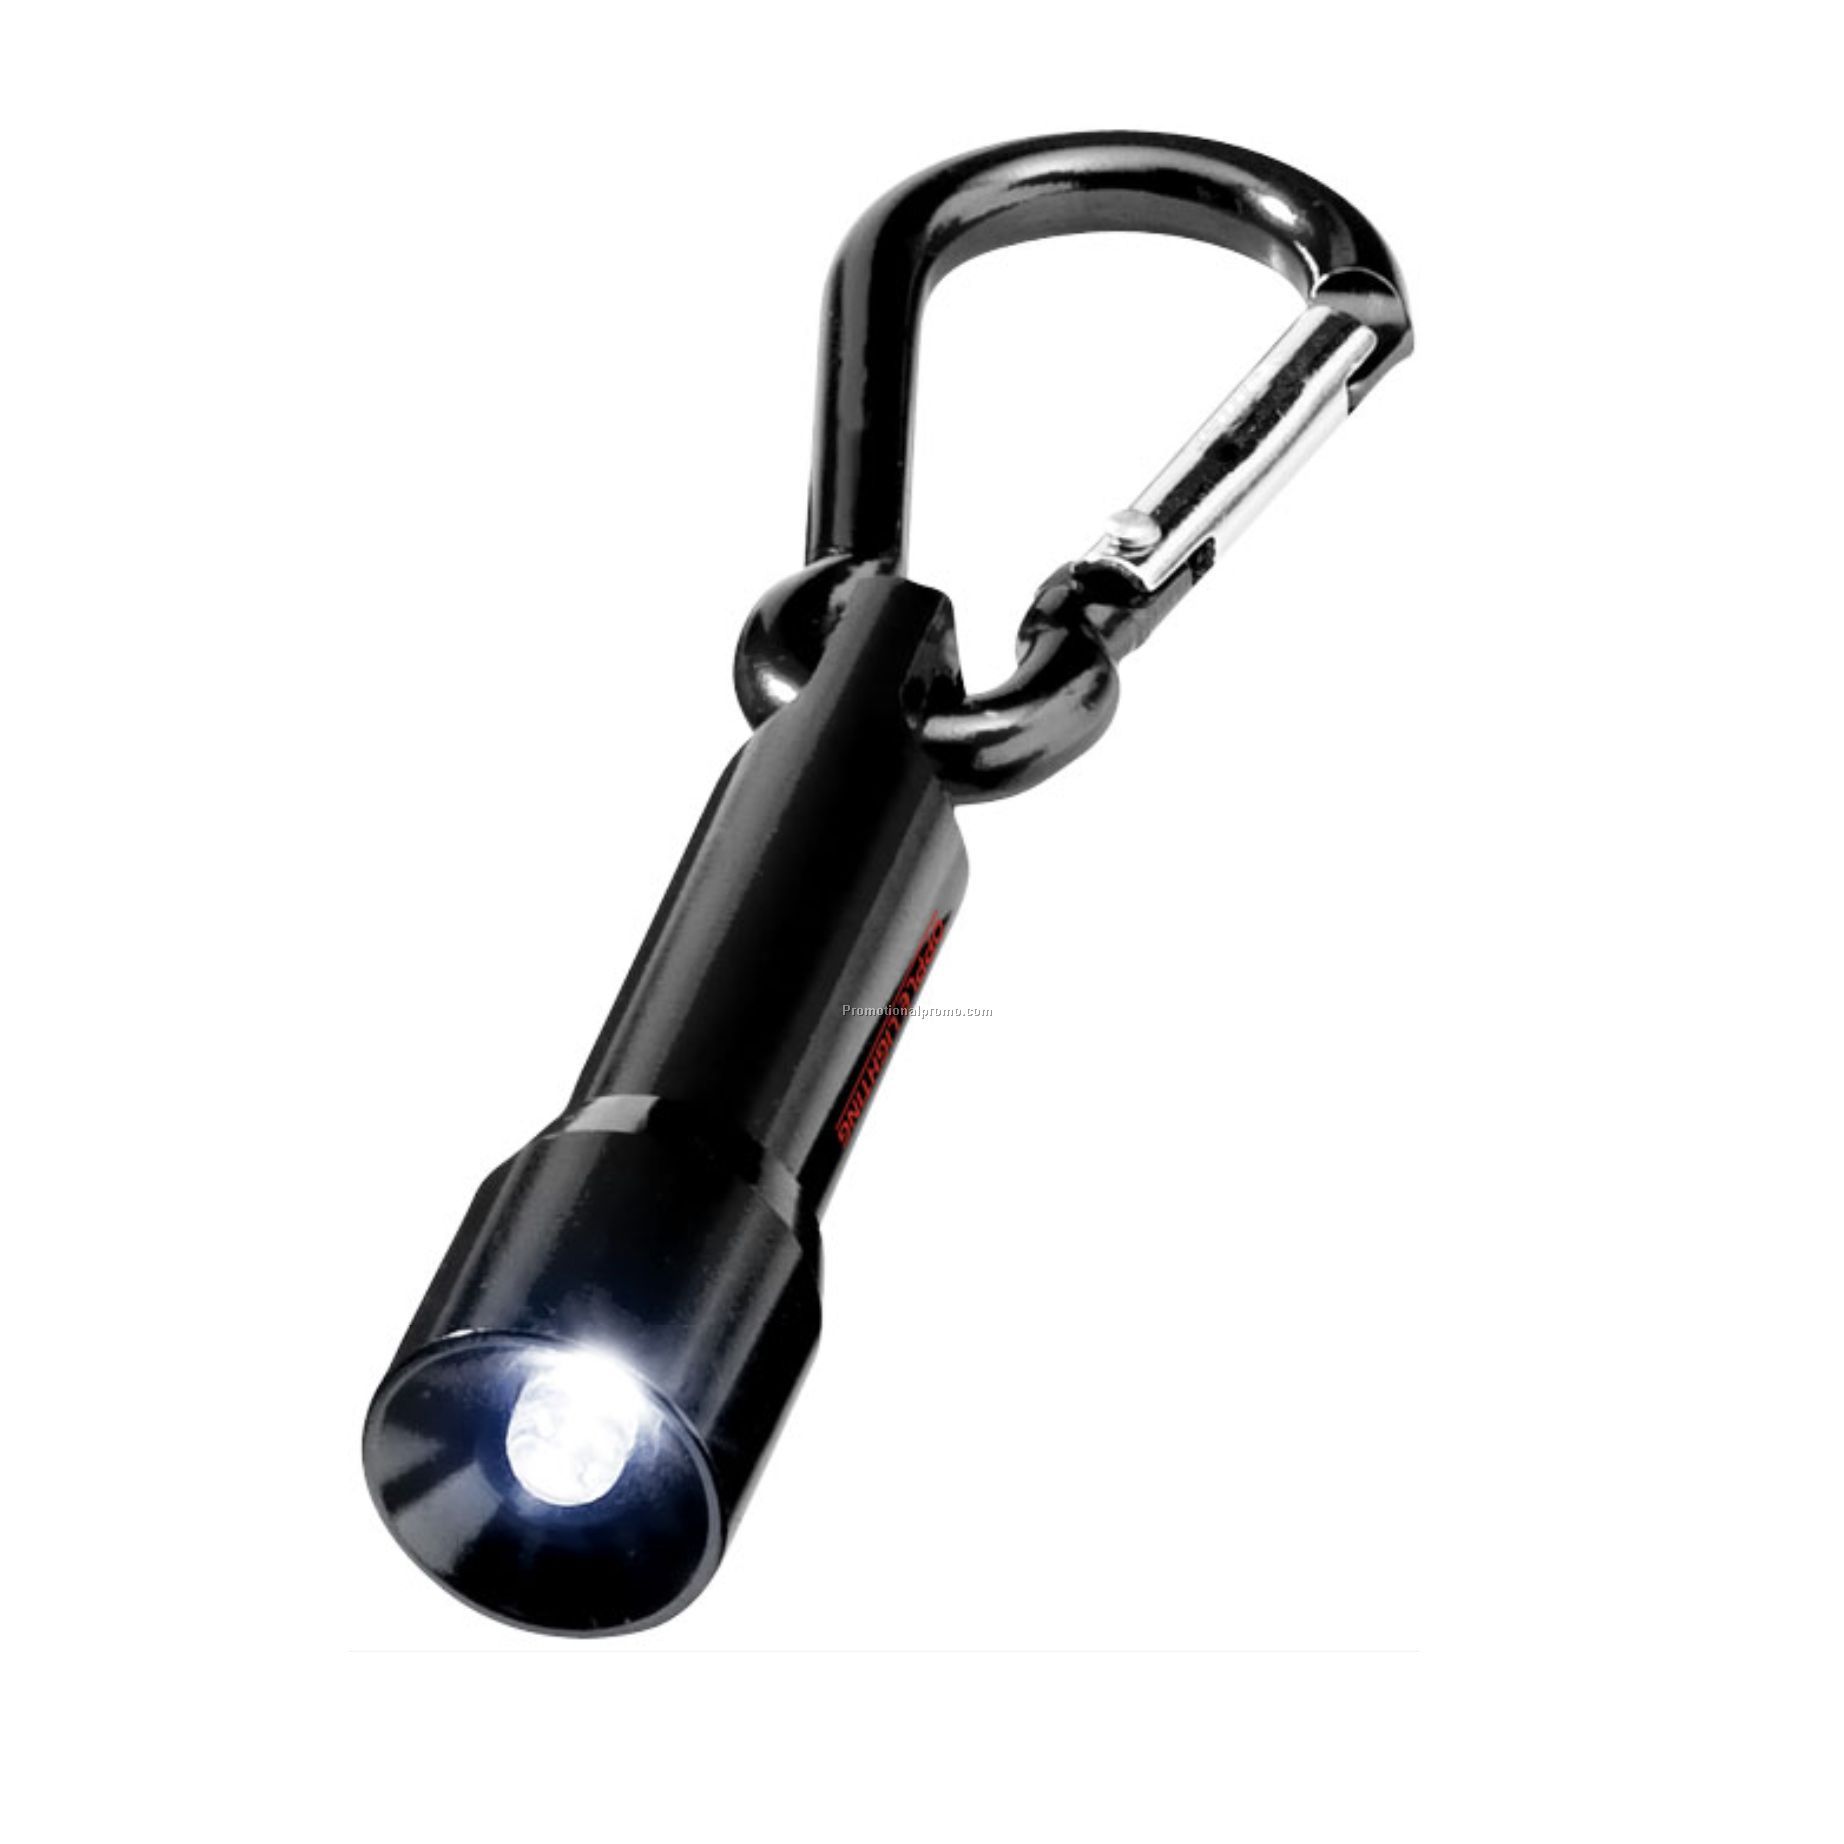 Mini LED flashlight torch with carabiner